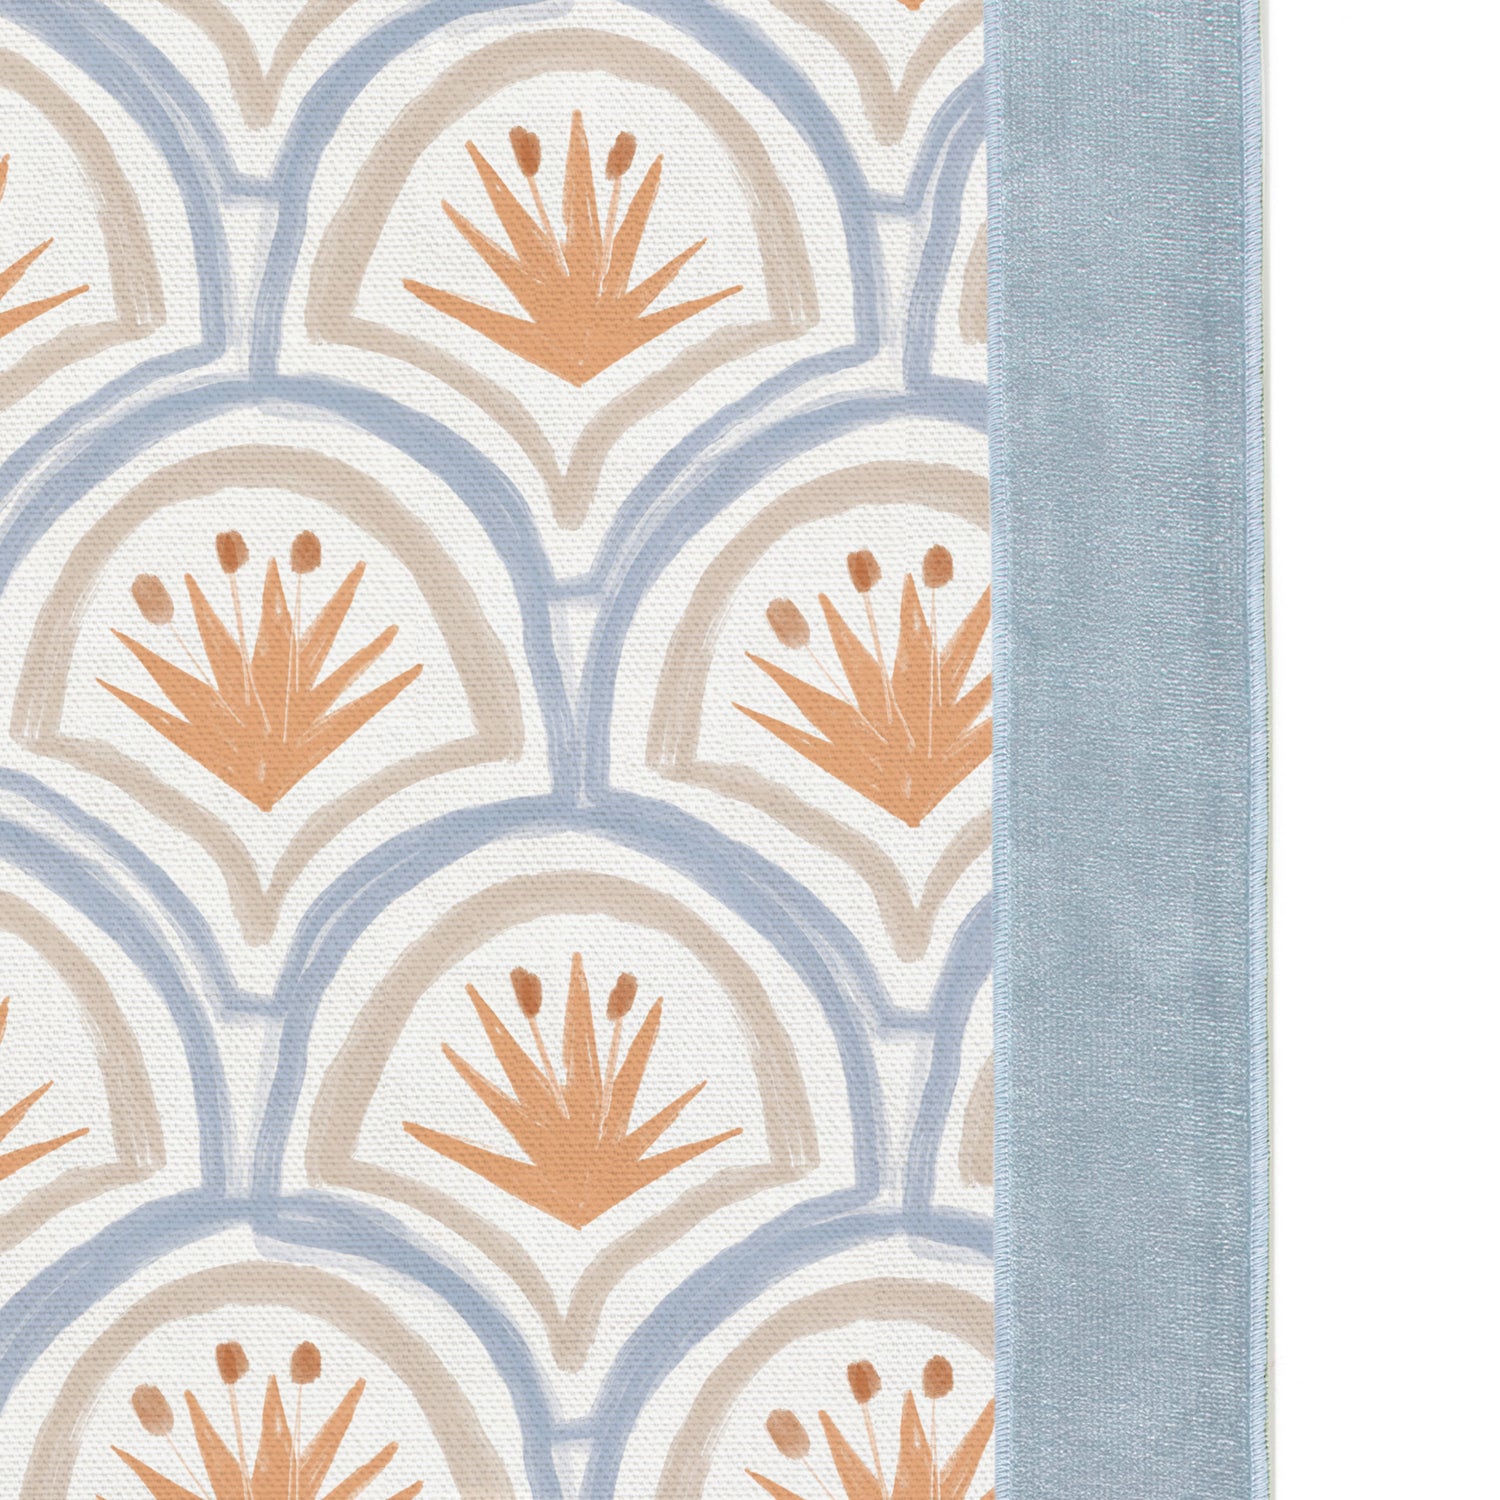 Upclose picture of Thatcher Apricot custom Art Deco Palm Patternshower curtain with sky velvet band trim